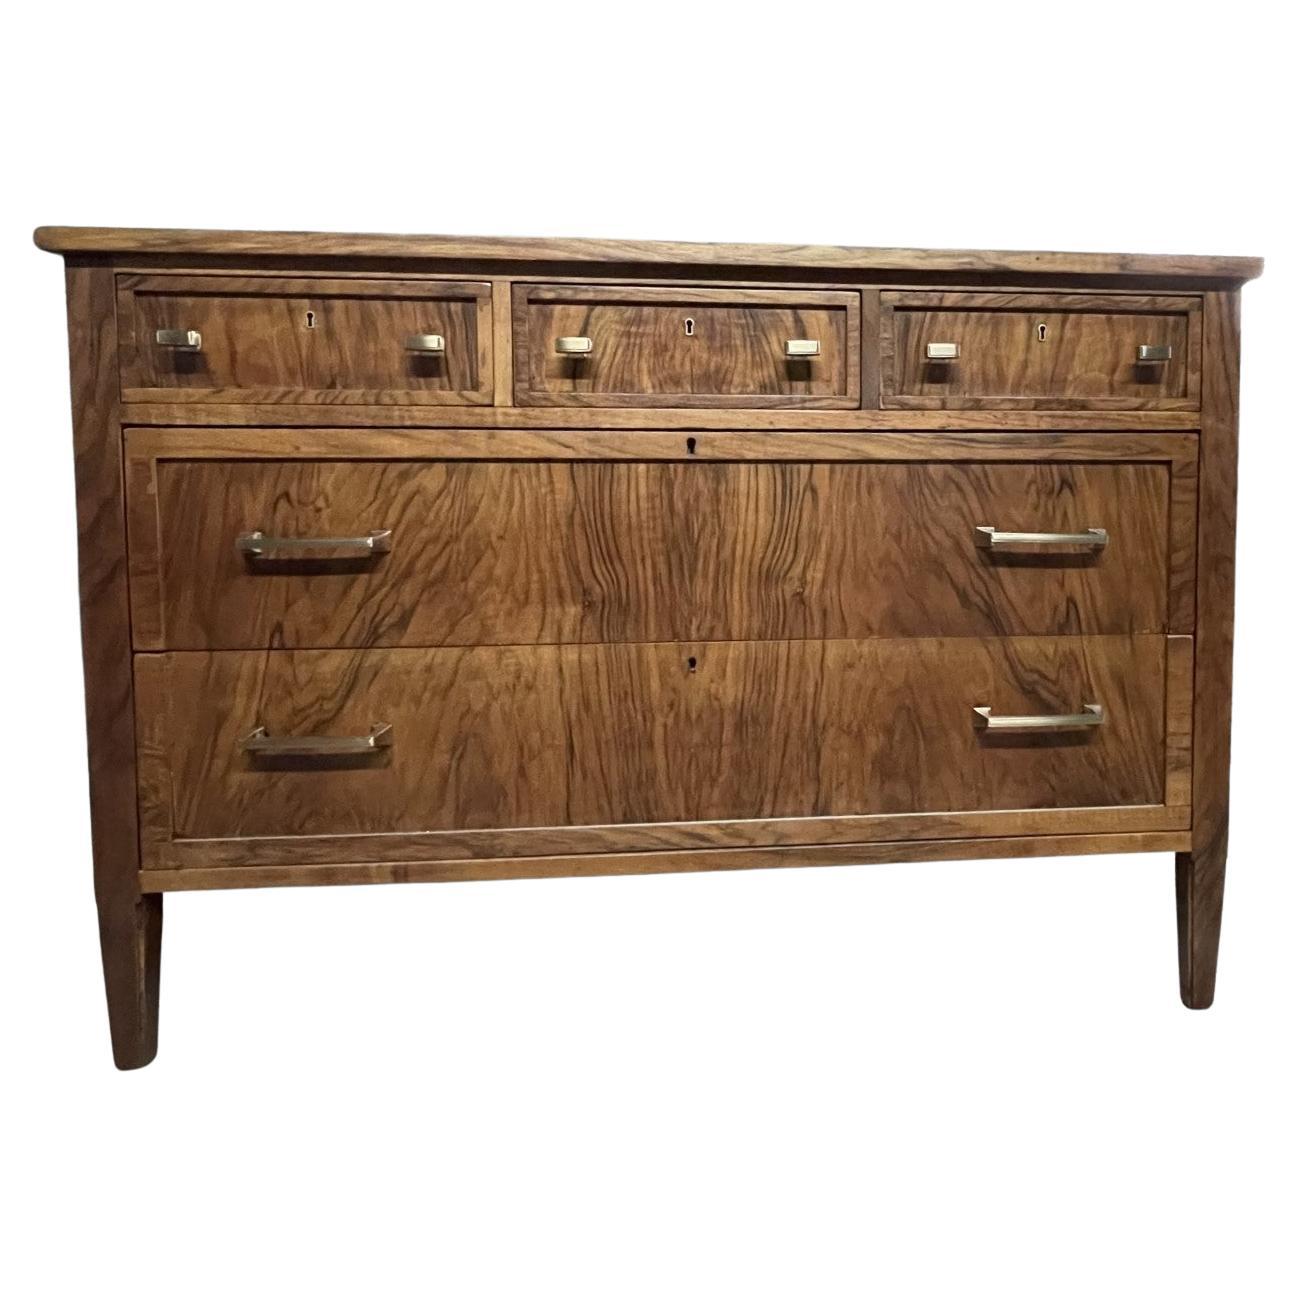 A rare French riviera olive wood Commode with stuning wood patern and amazing craft, Fully restaured by french nicoisse restauration artisan. 
Amazing quality and condition. Oilded bronze hardware.
